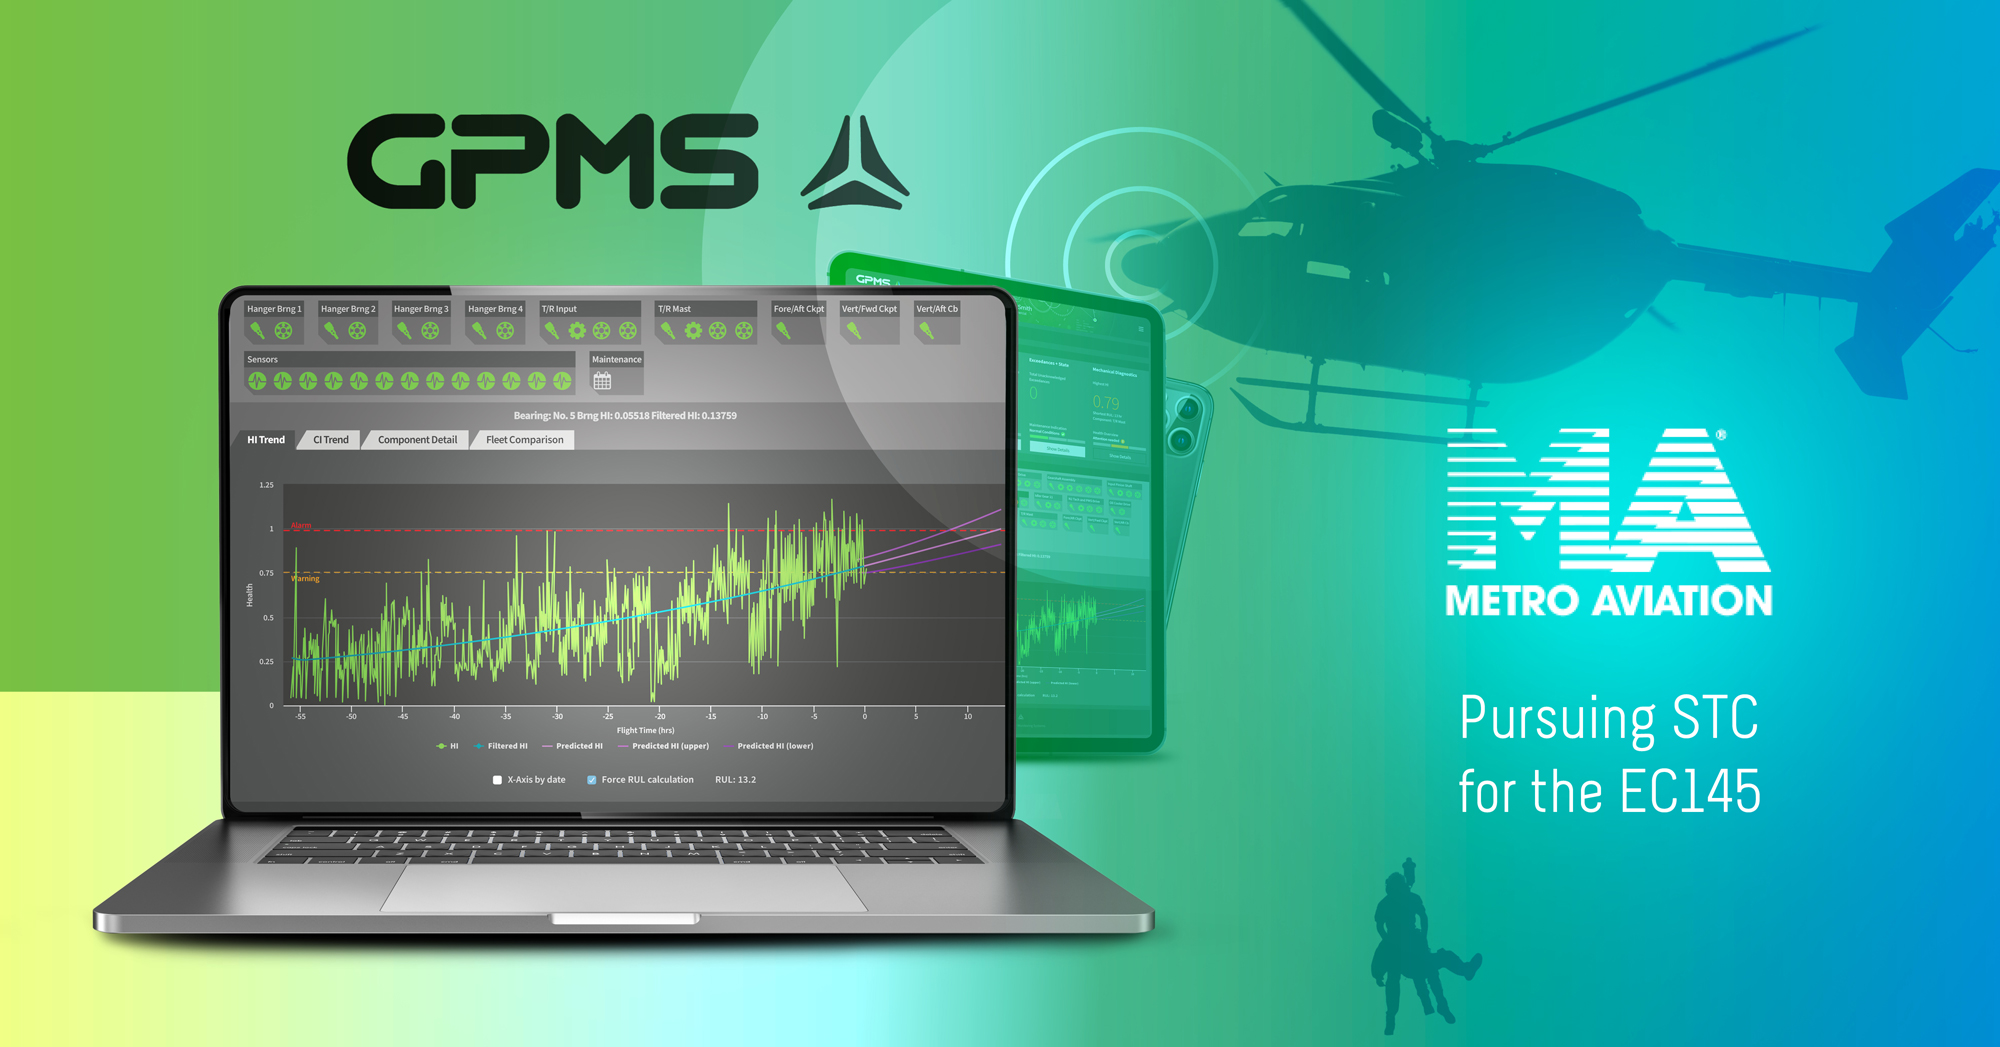 PRESS RELEASE: GPMS to Bring Foresight MX HUMS to the EC145 Platform